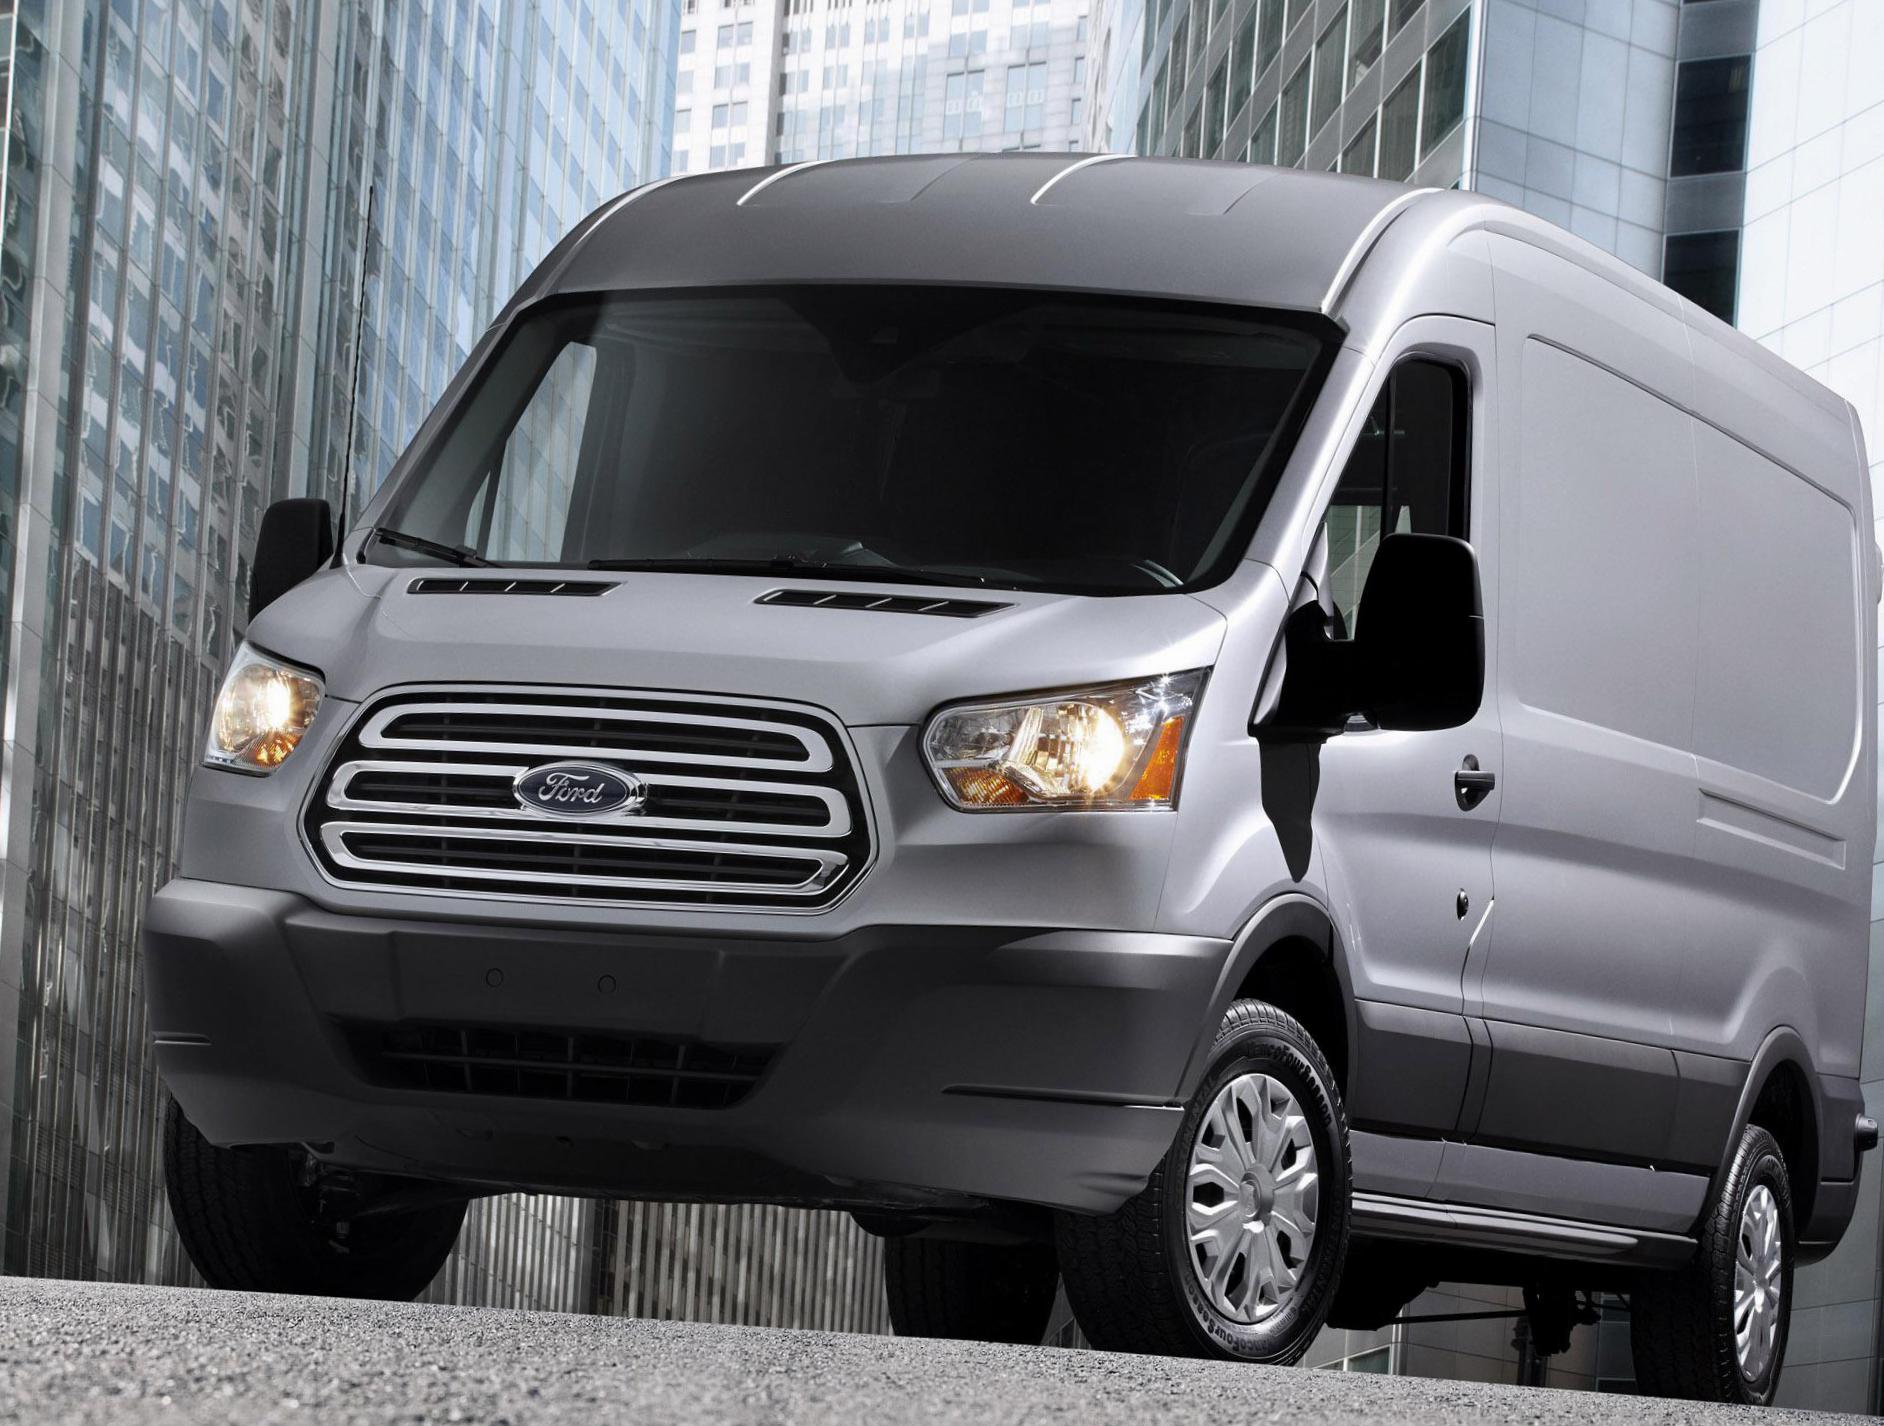 Transit Ford lease 2012